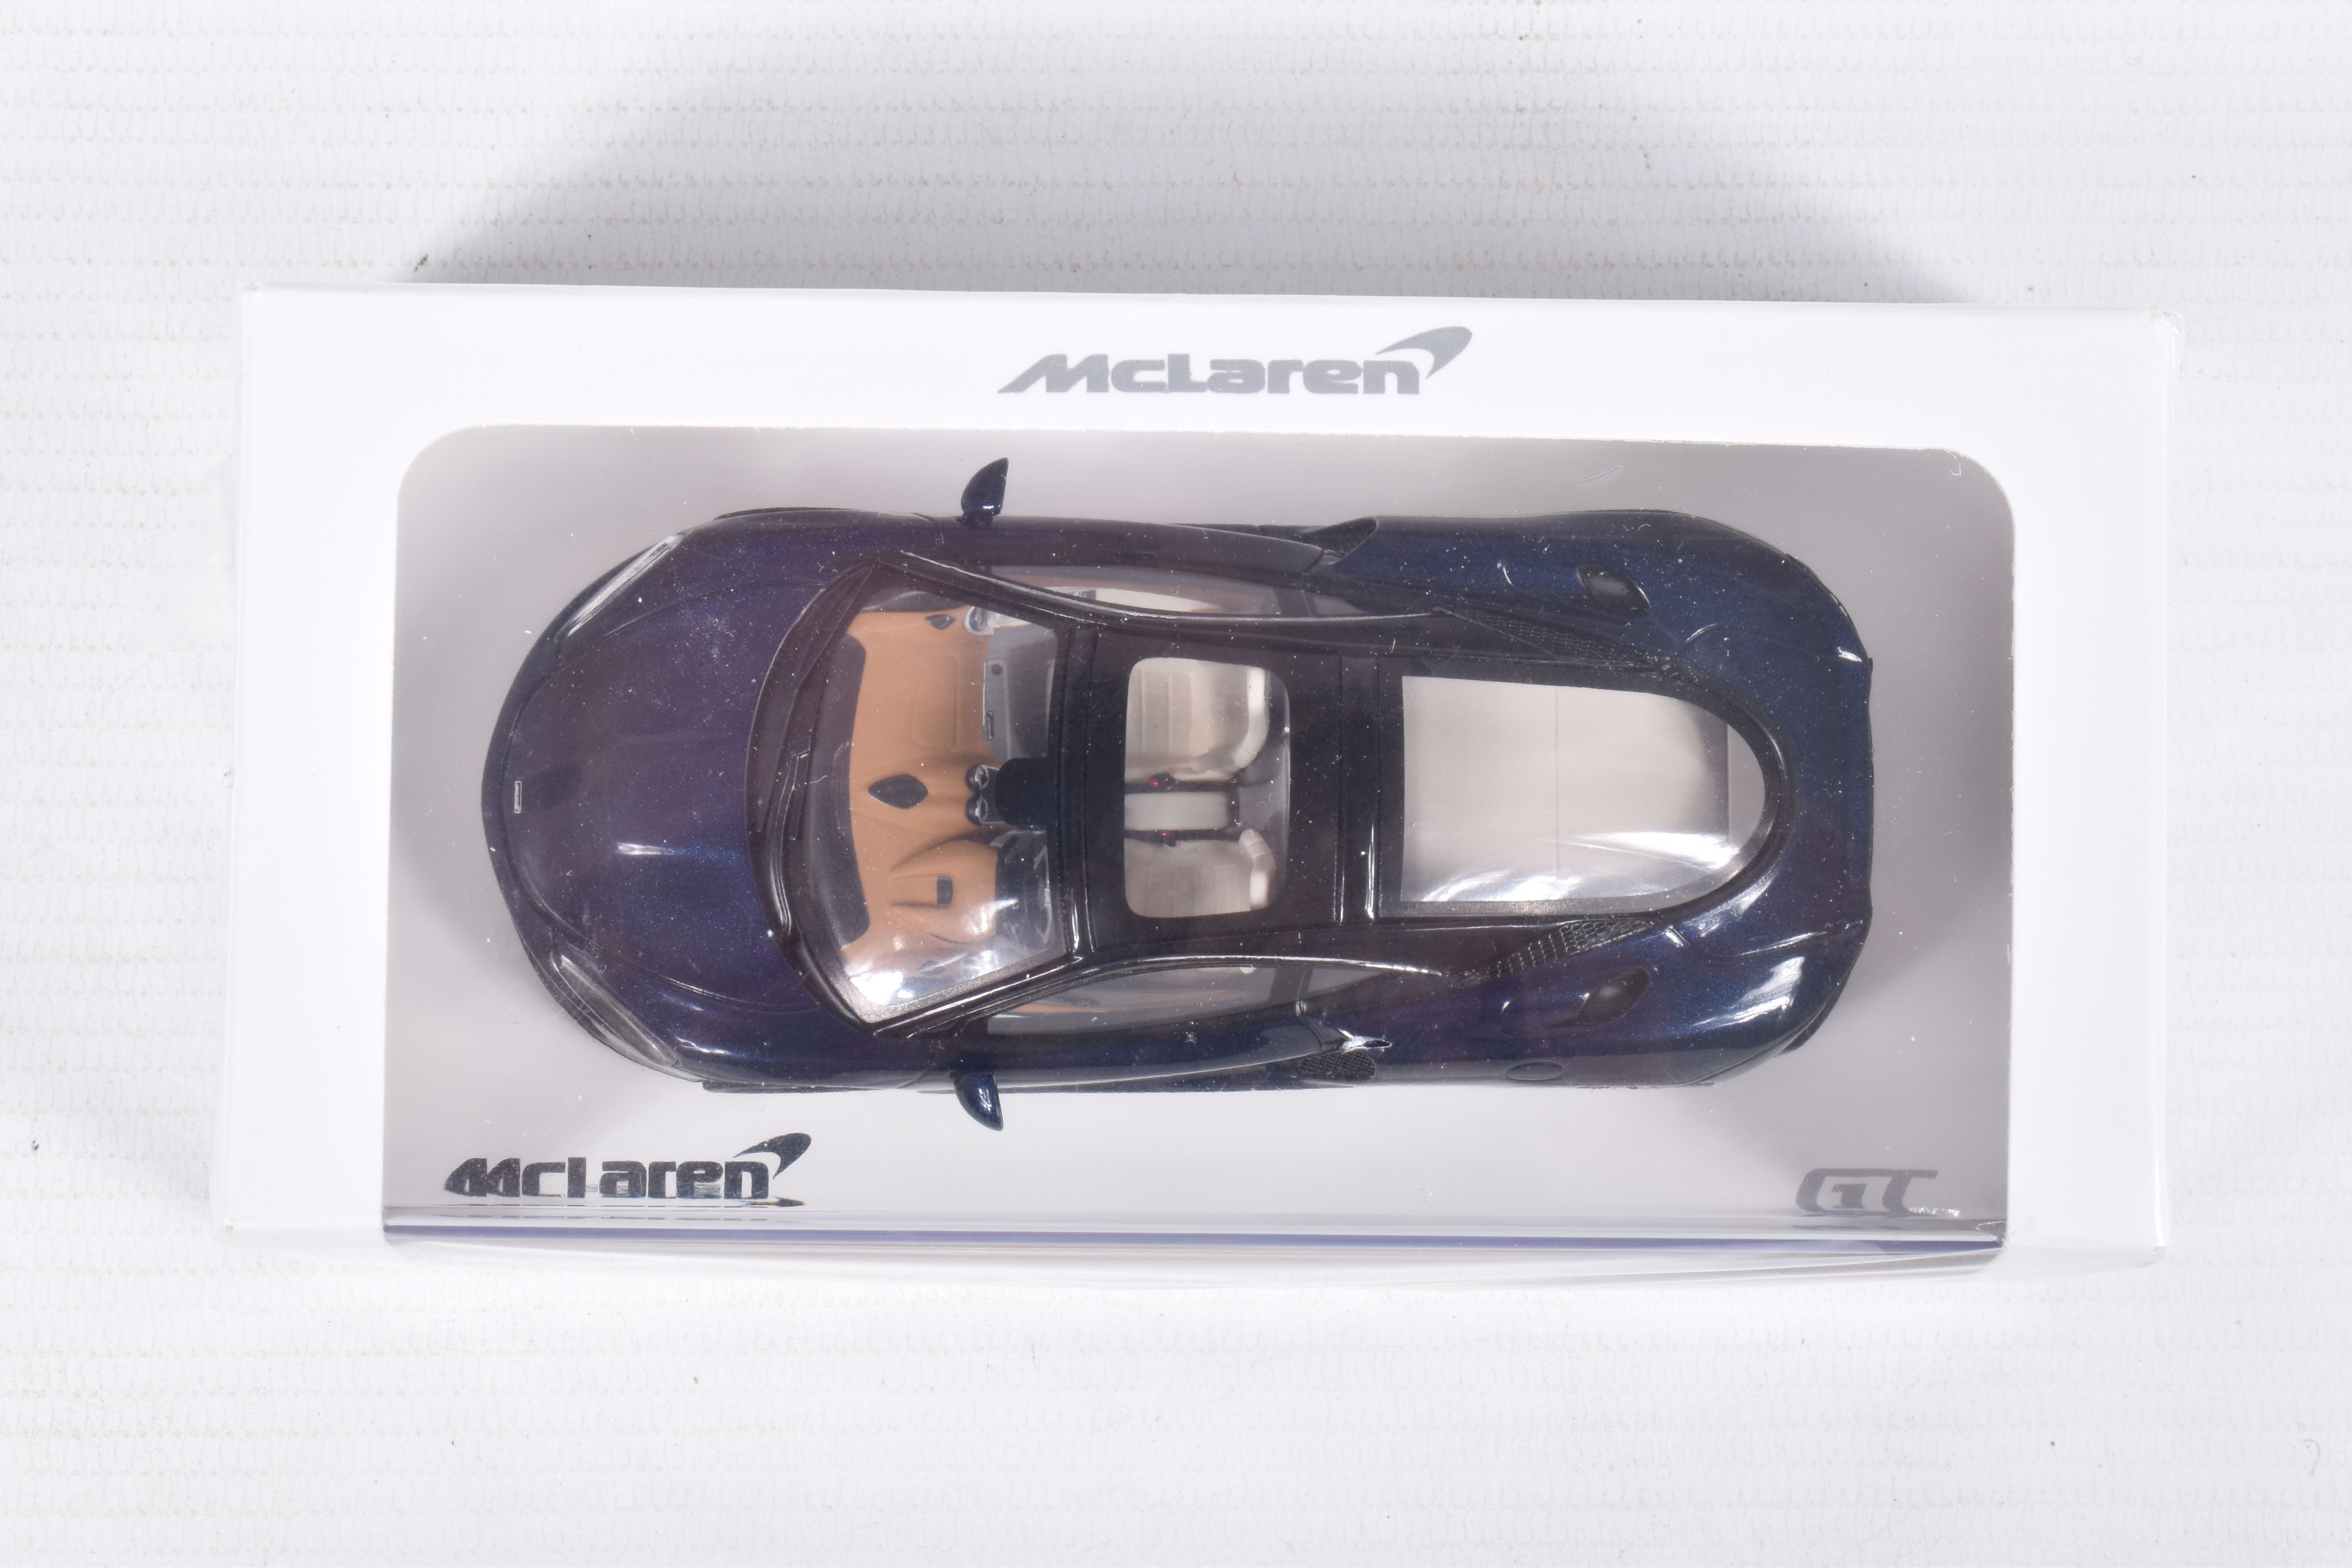 FIVE BOXED MCLAREN 1:43 SCALE MODELS to include a Welly McLaren GT in Bronze, a McLaren GT 2019 in - Image 8 of 17